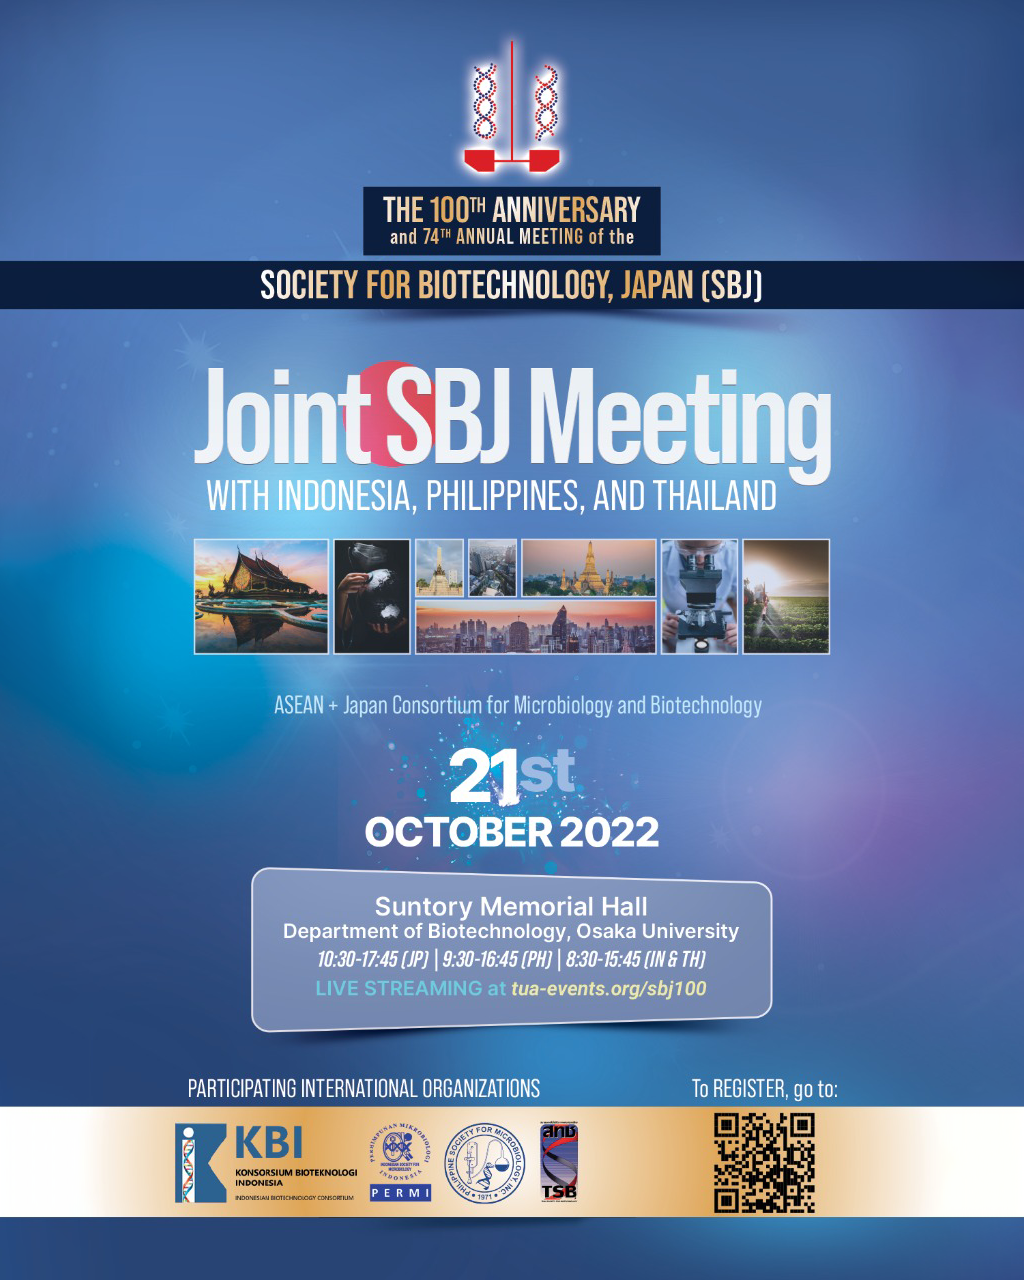 SBJ’s CENTENNIAL CELEBRATION and 74th ANNUAL MEETING